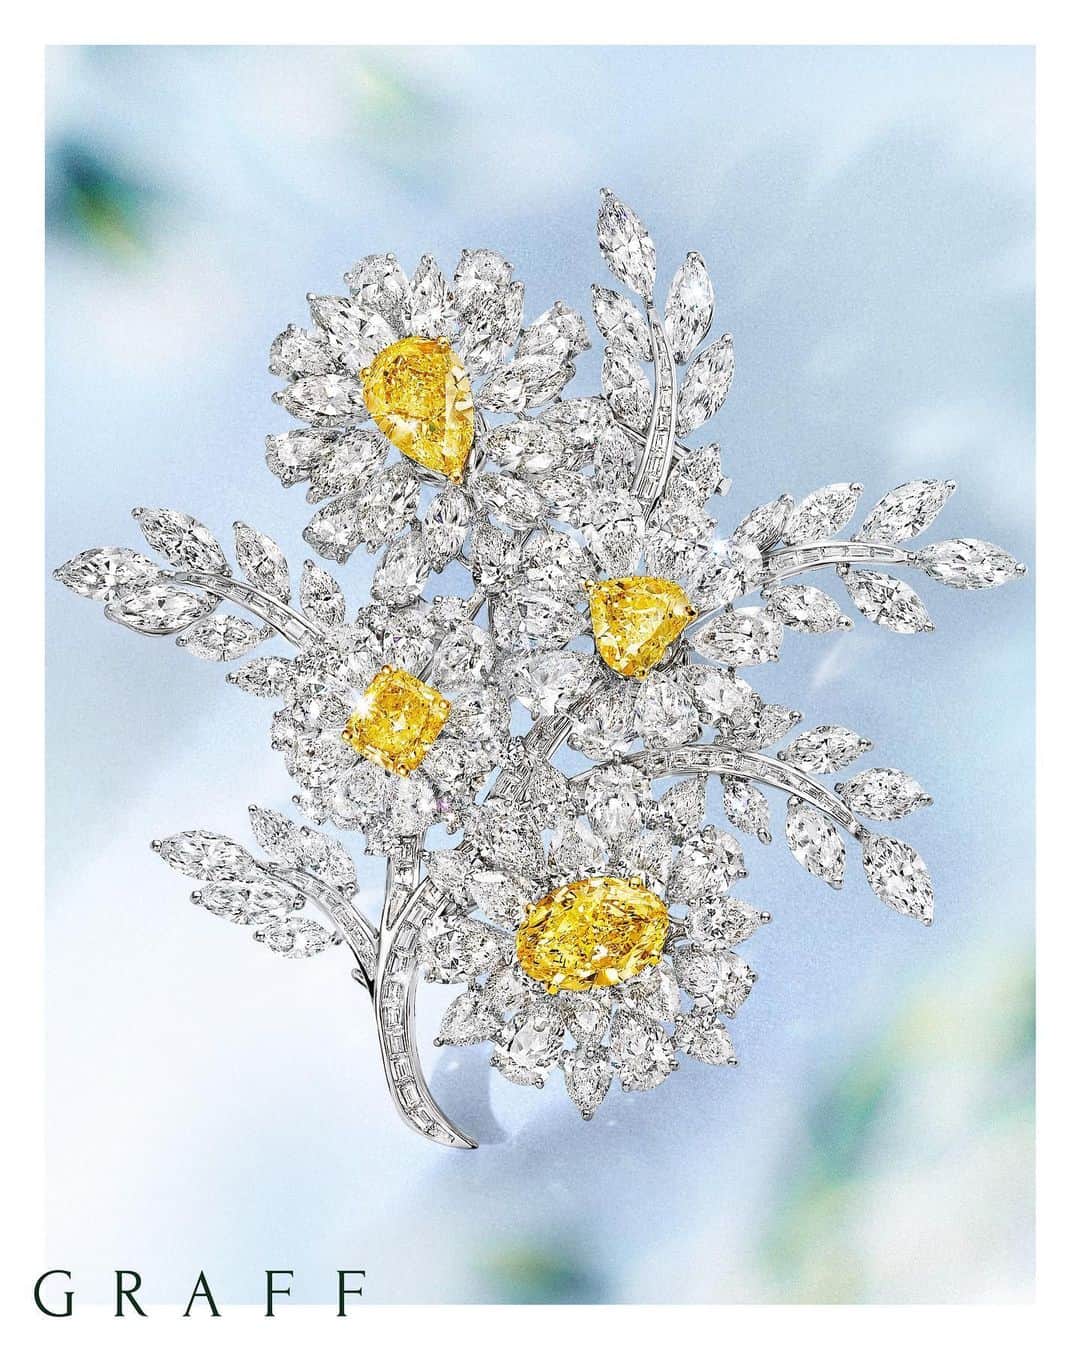 Graffさんのインスタグラム写真 - (GraffInstagram)「Spirit of Spring | Discover Graff's legacy of creating magnificent brooches. 1. A floral design showcasing four exceptional vivid yellow diamonds.  2. The famous 'Hair & Jewel' image commissioned by Mr Graff in 1970.  3. A unique floral brooch from 1980 showcasing an unparalleled collection of vivid pink diamonds.  4. Exquisite figurative brooches are a speciality of Graff.  5. A sculptural floral brooch embracing an incredibly rare collection of coloured diamonds. ⠀⠀⠀⠀⠀⠀⠀⠀⠀ ⠀⠀⠀⠀⠀⠀⠀⠀⠀ ⠀⠀⠀⠀⠀⠀⠀⠀⠀ ⠀⠀⠀⠀⠀⠀⠀⠀⠀ ⠀⠀⠀⠀⠀⠀⠀⠀⠀ ⠀⠀⠀⠀⠀⠀⠀⠀⠀ ⠀⠀⠀⠀⠀⠀⠀⠀⠀ ⠀⠀⠀⠀⠀⠀⠀⠀⠀ ⠀⠀⠀⠀⠀⠀⠀⠀⠀ ⠀⠀⠀⠀⠀⠀⠀⠀⠀ ⠀⠀⠀⠀⠀⠀⠀⠀⠀ ⠀⠀⠀⠀⠀⠀⠀⠀⠀ ⠀⠀⠀⠀⠀⠀⠀⠀⠀ ⠀⠀⠀⠀ #GraffDiamonds #HighJewelry #SpiritofSpring #FallinLoveWithGraff」5月22日 21時22分 - graff